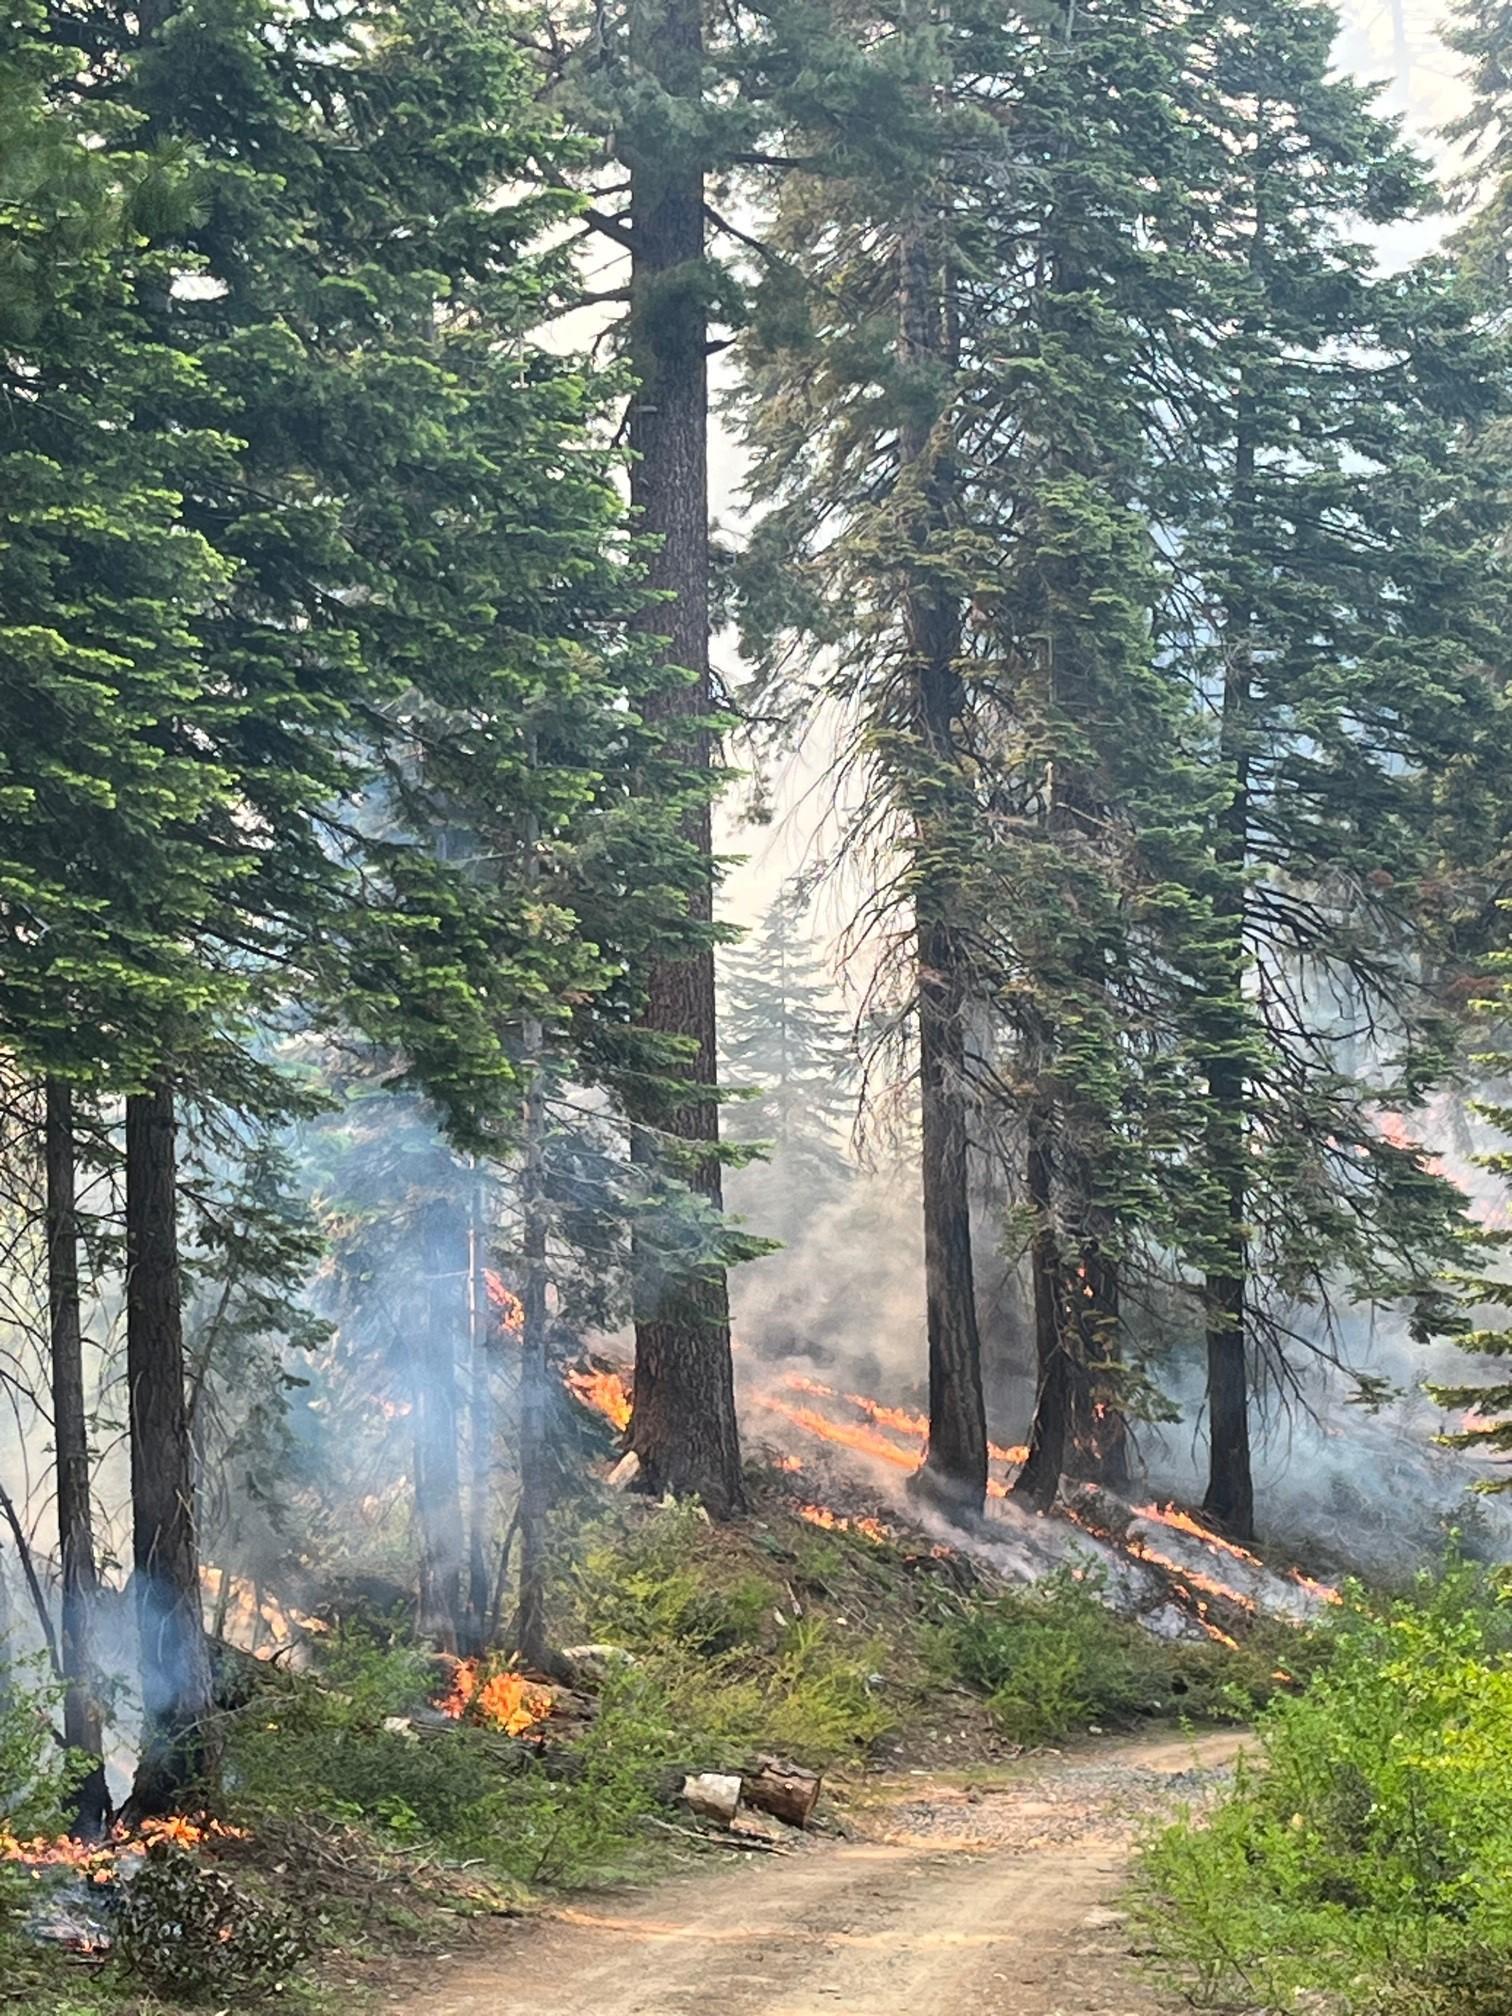 Smoke filling a forested landscape with flames between the tree